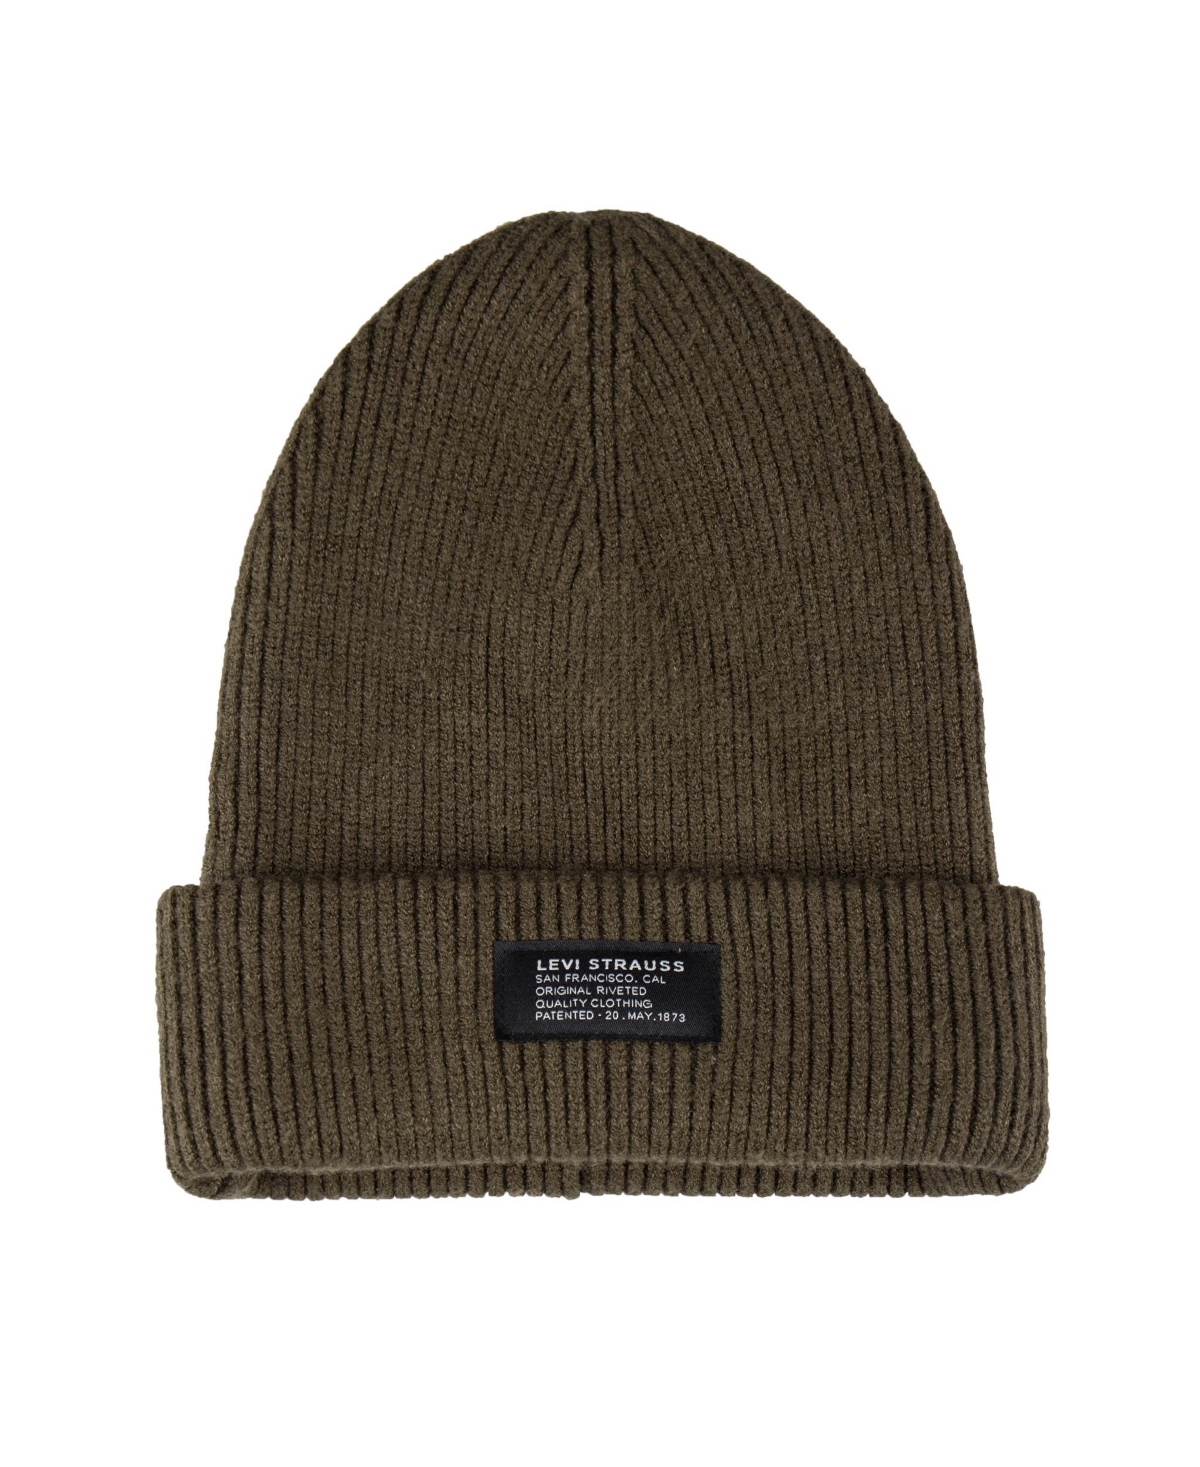 Levi's Men's Super Soft Rib Knit Cuff Beanie With Jersey Lining In Olive